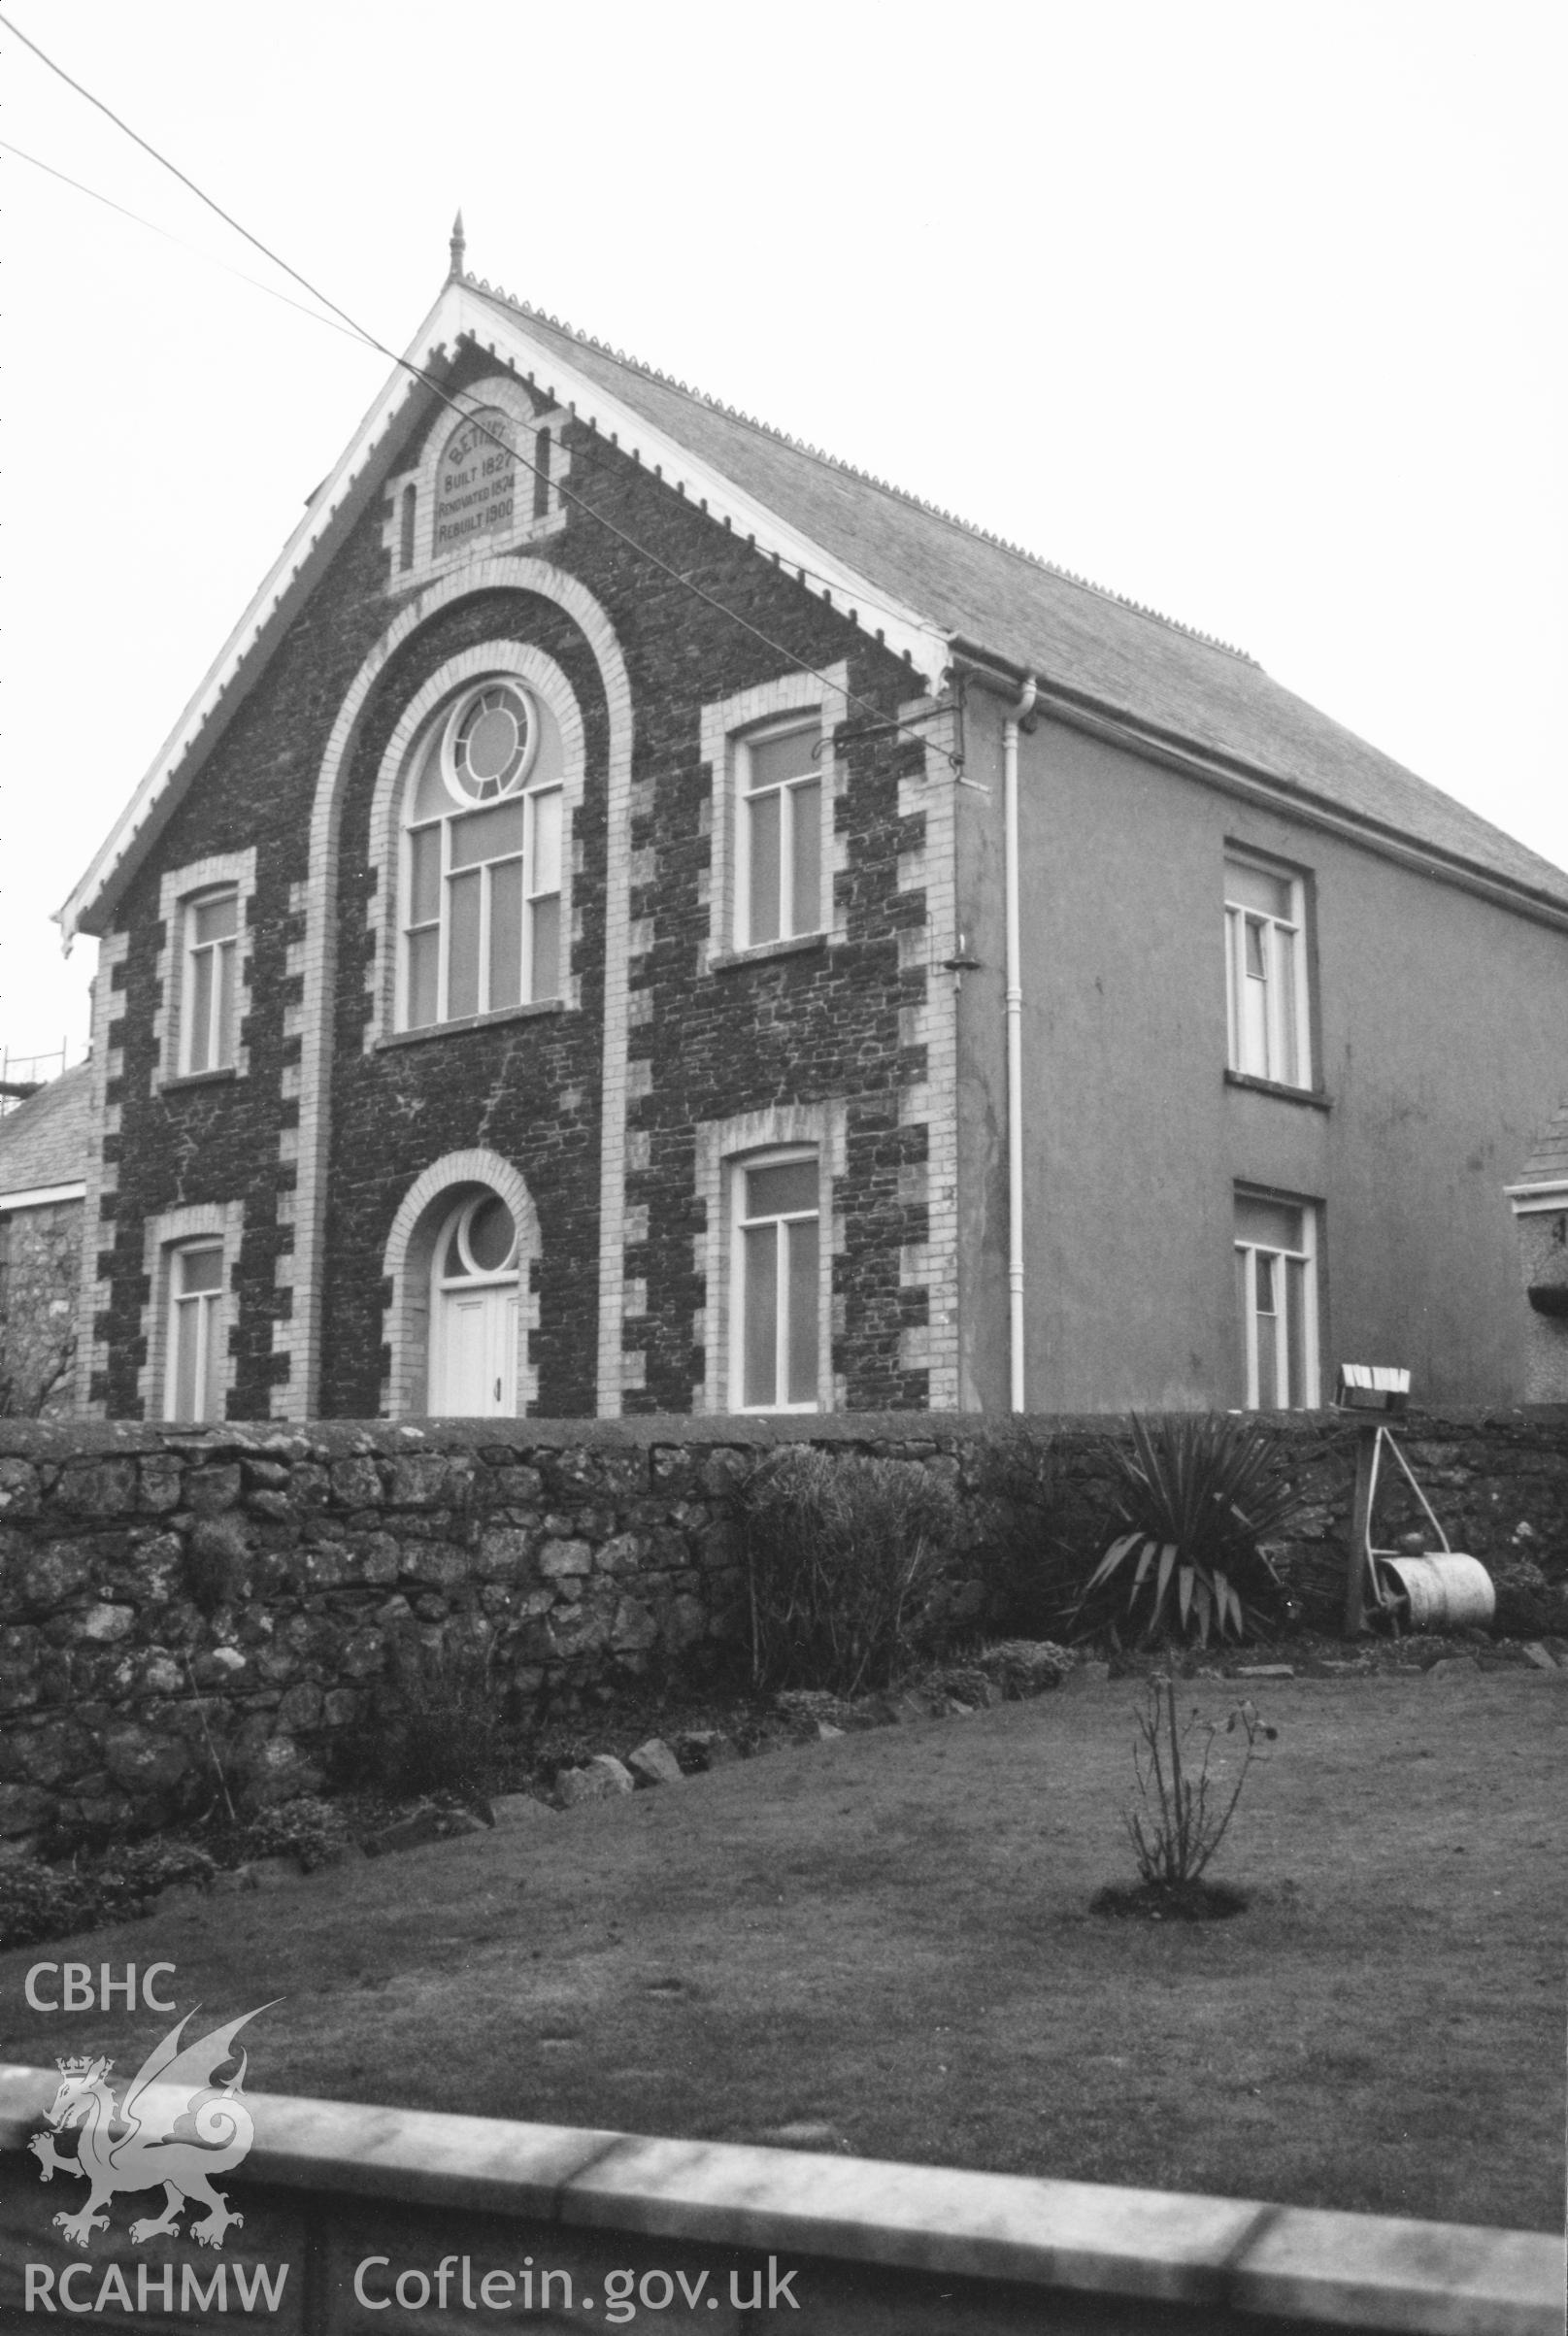 Digital copy of a black and white photograph showing exterior view of Bethel Independent Chapel, Wolfsdale, taken by Robert Scourfield, 1996.